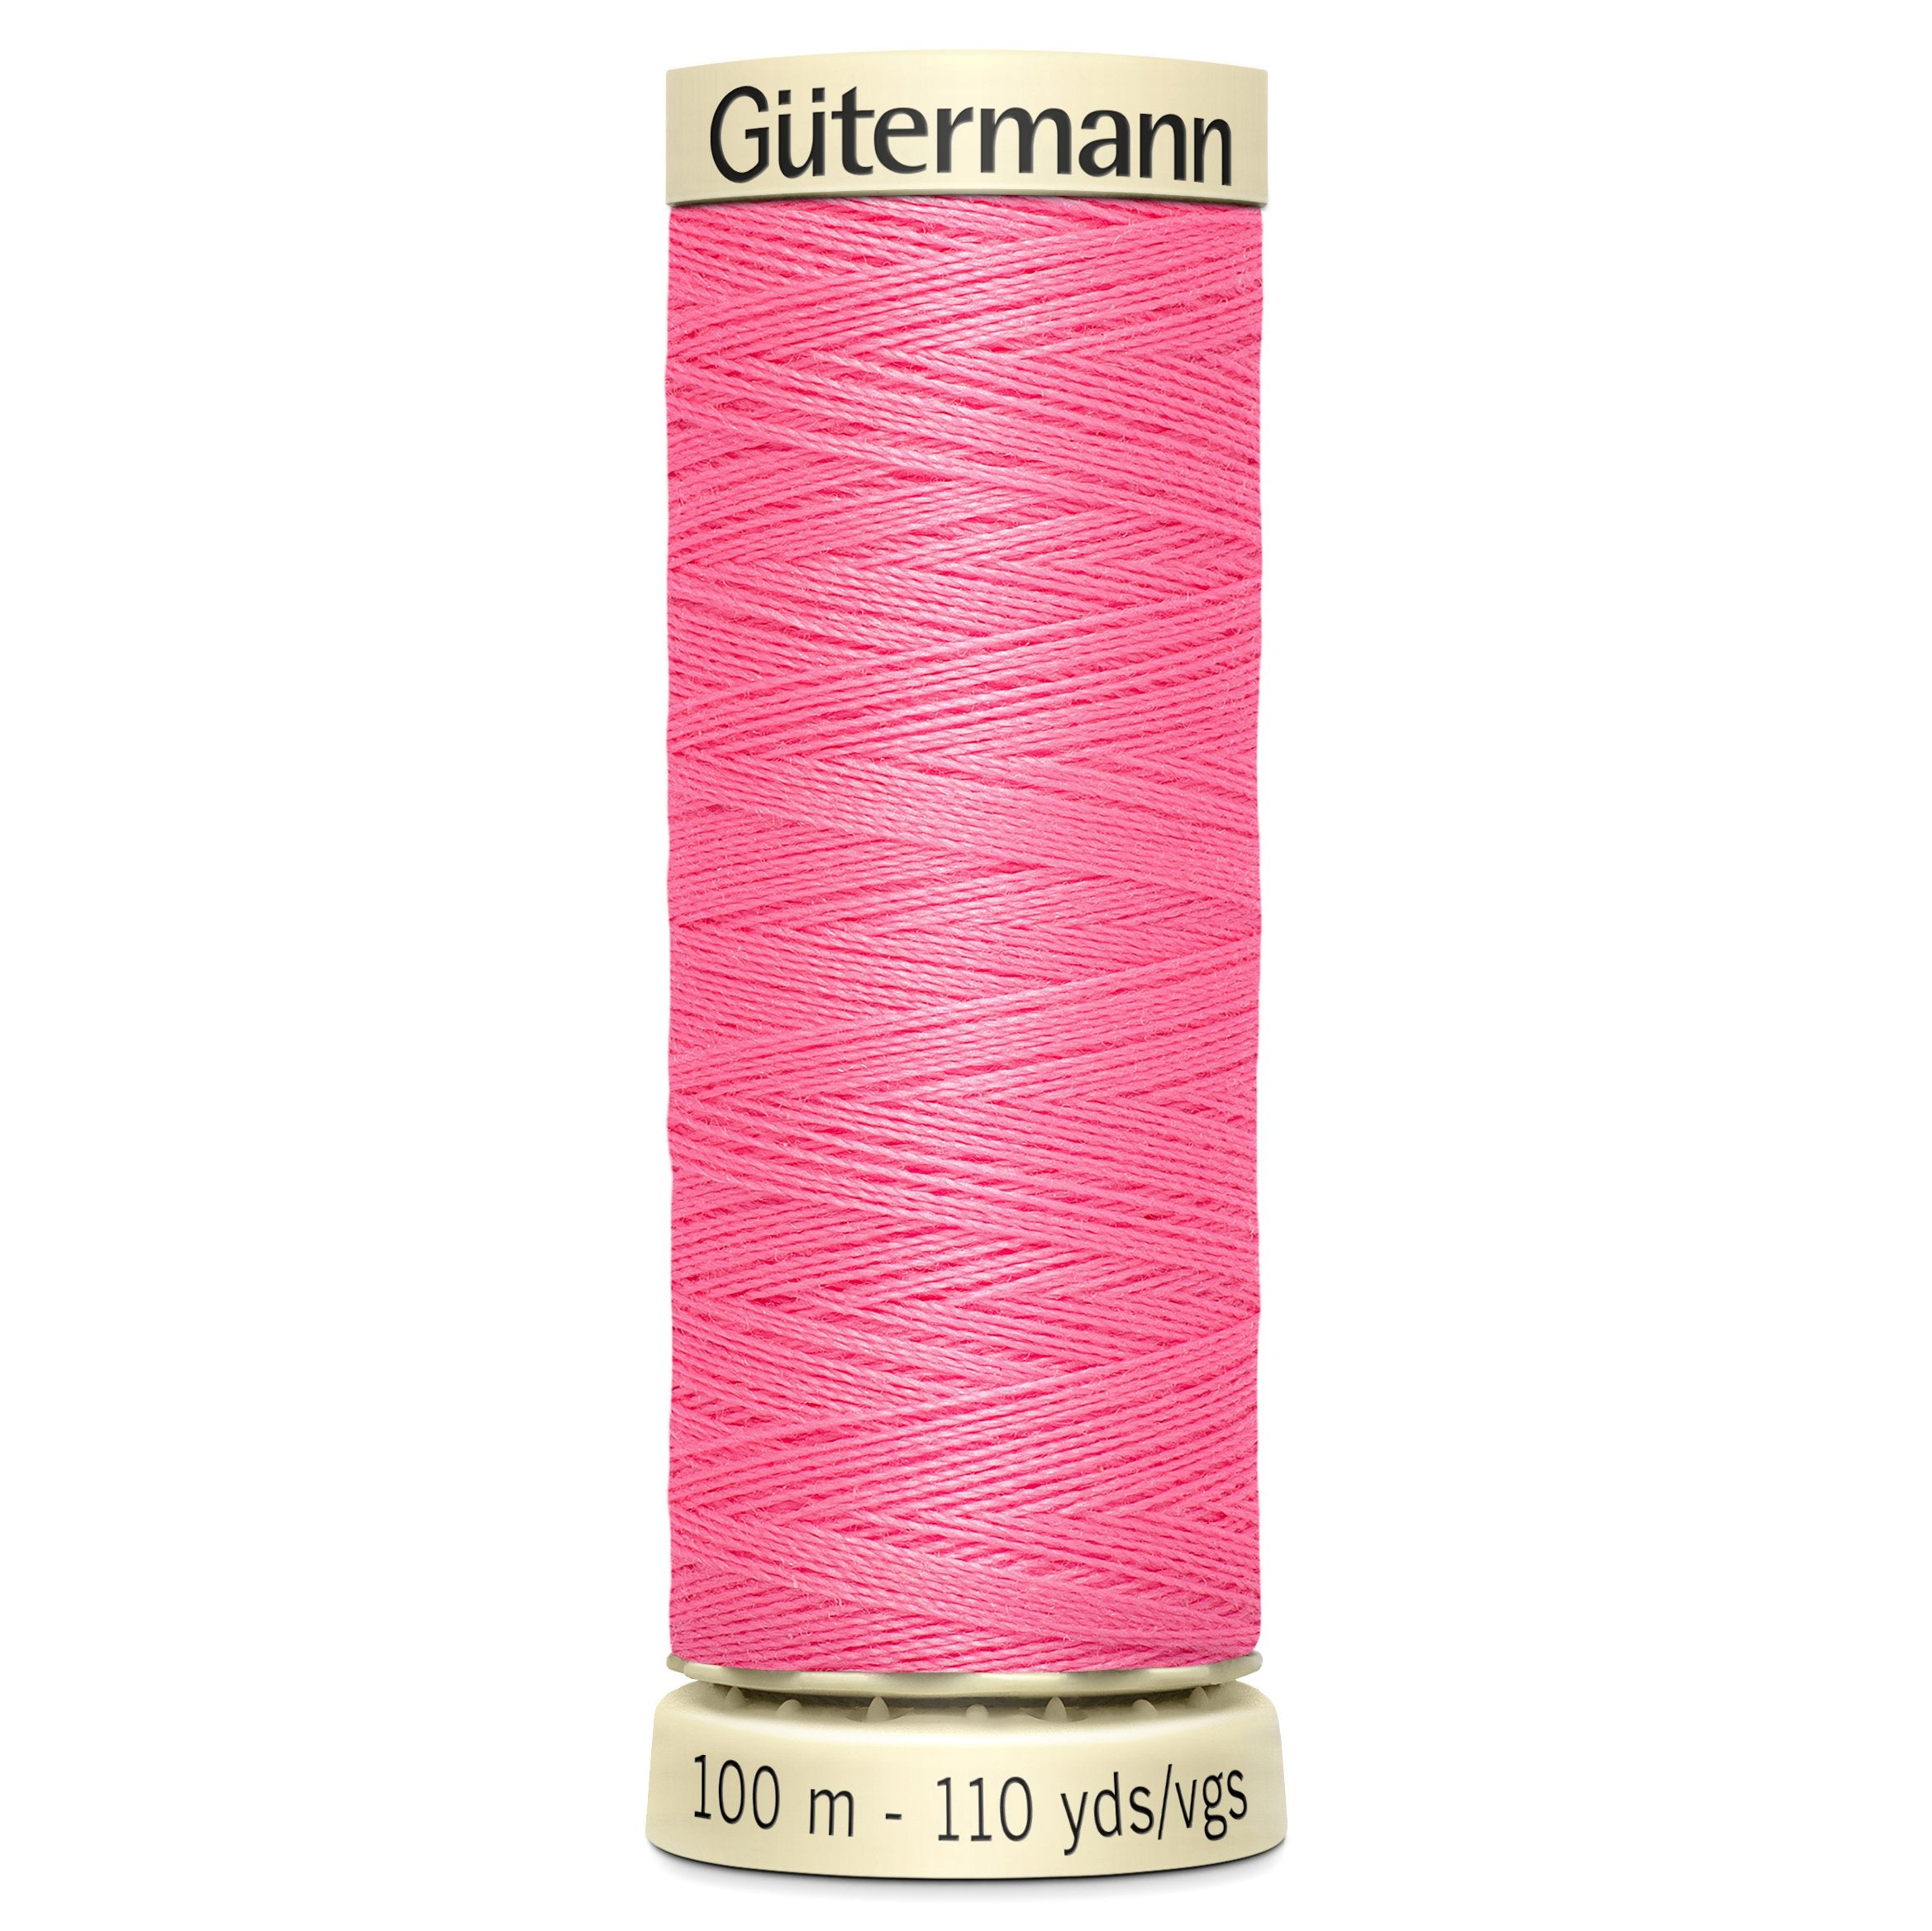 Gutermann Sew All Thread colour 728 Pink from Jaycotts Sewing Supplies